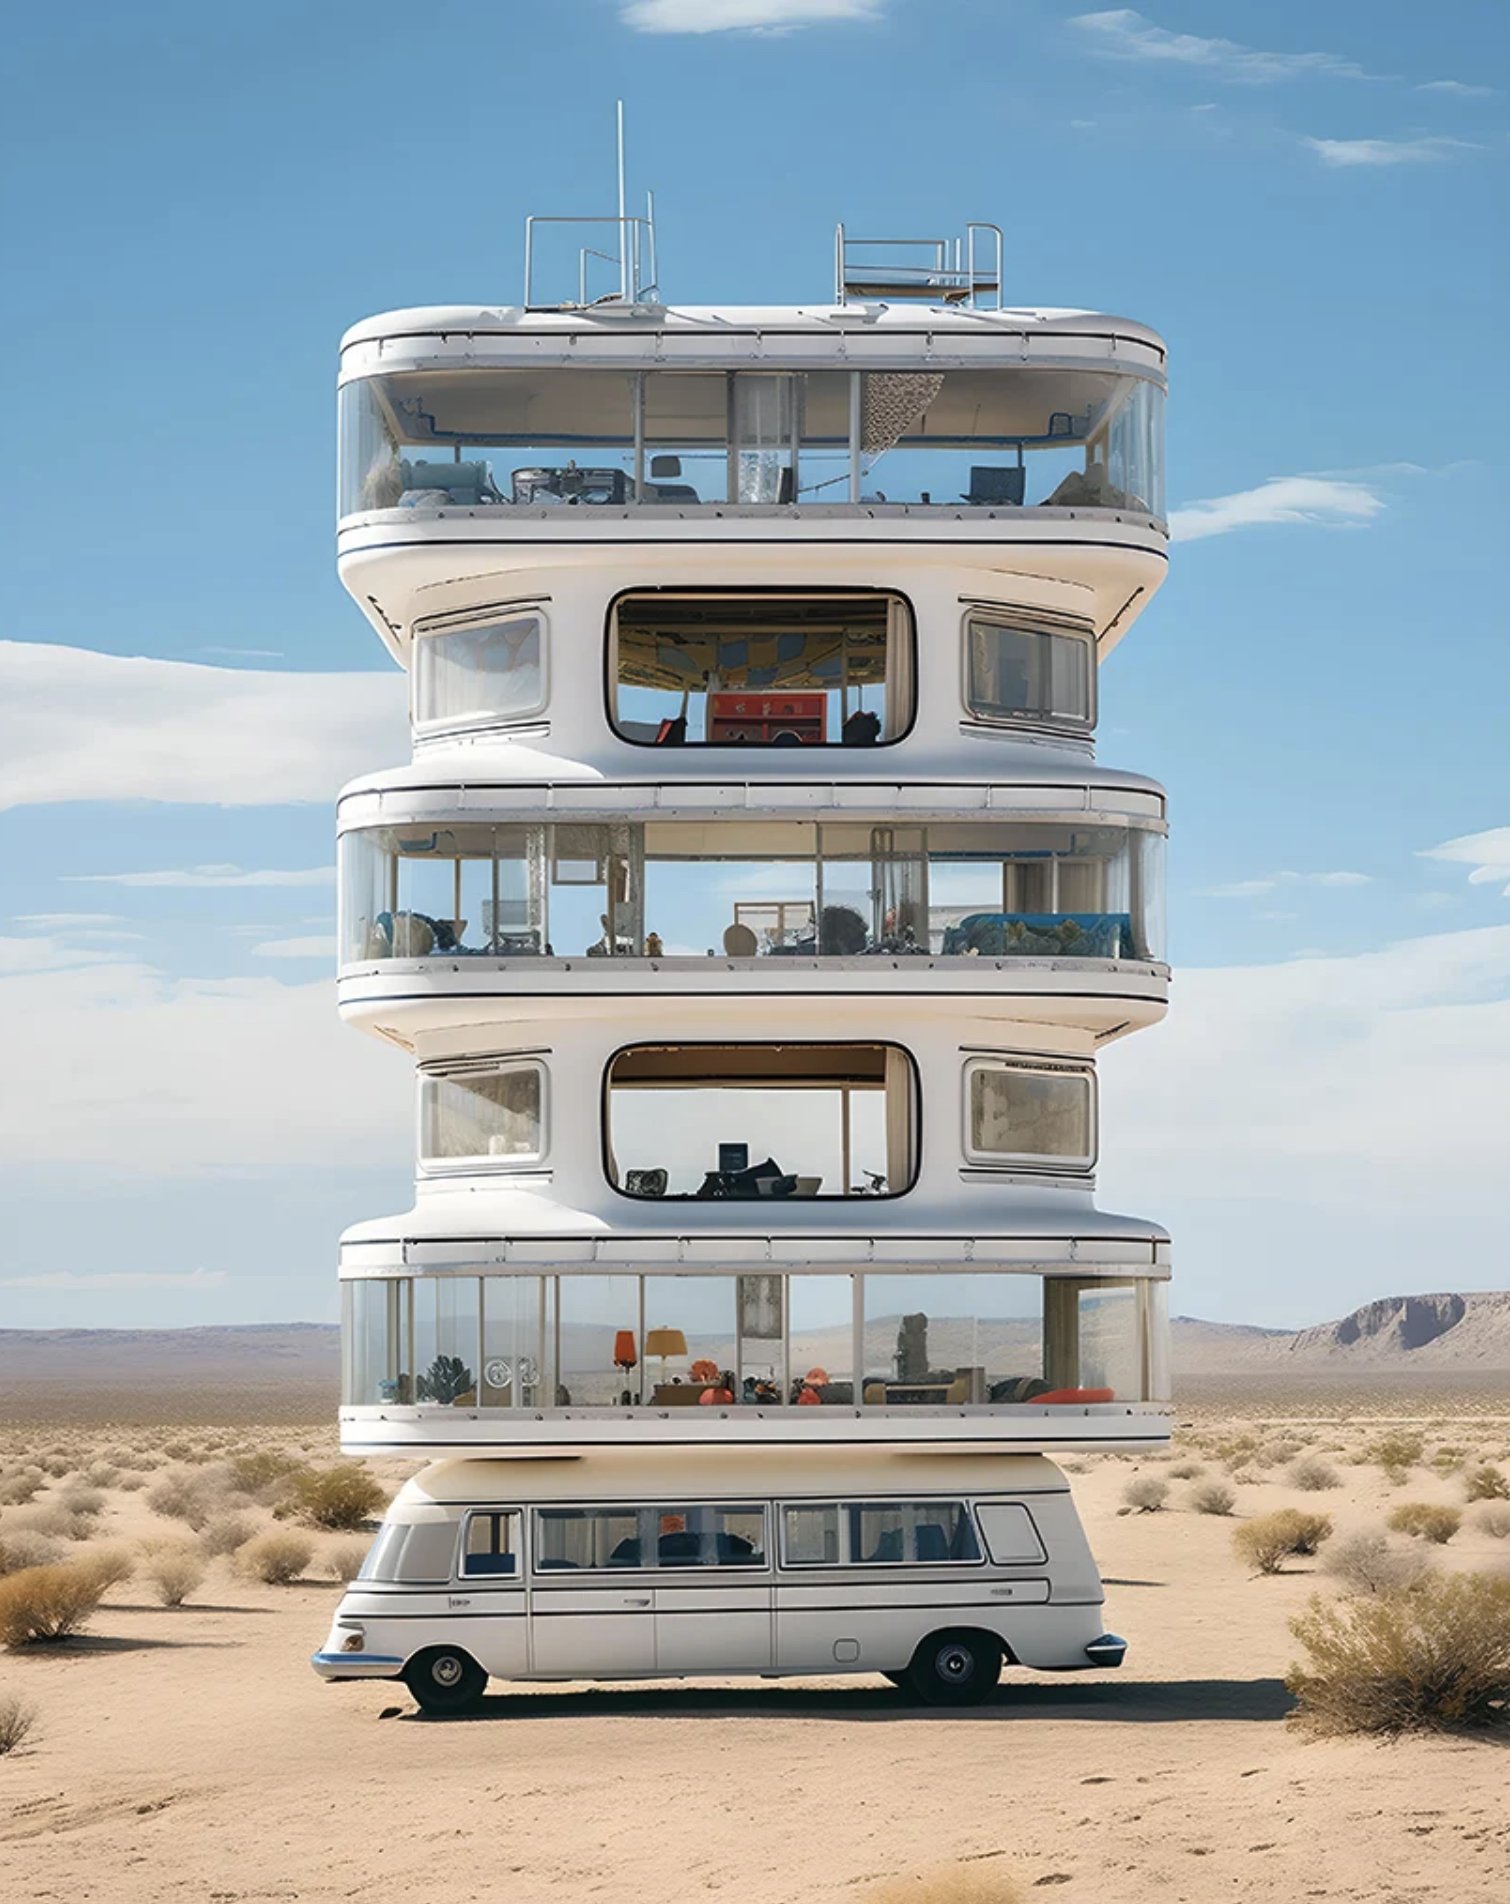 Neural network showed the houses of the future: modular and on wheels